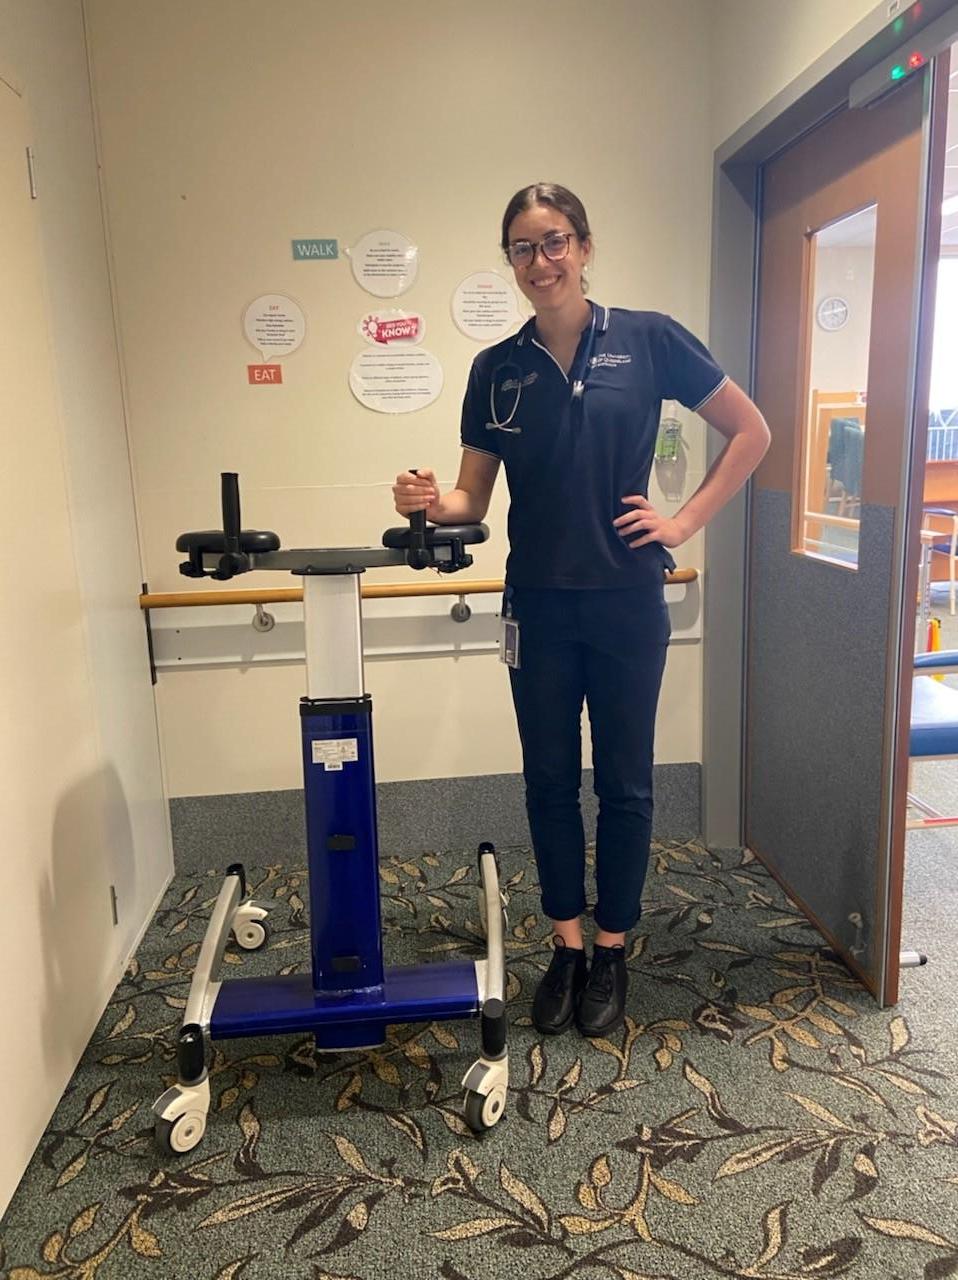 Bachelor of Physiotherapy (Honours) student Annie Collidge on placement